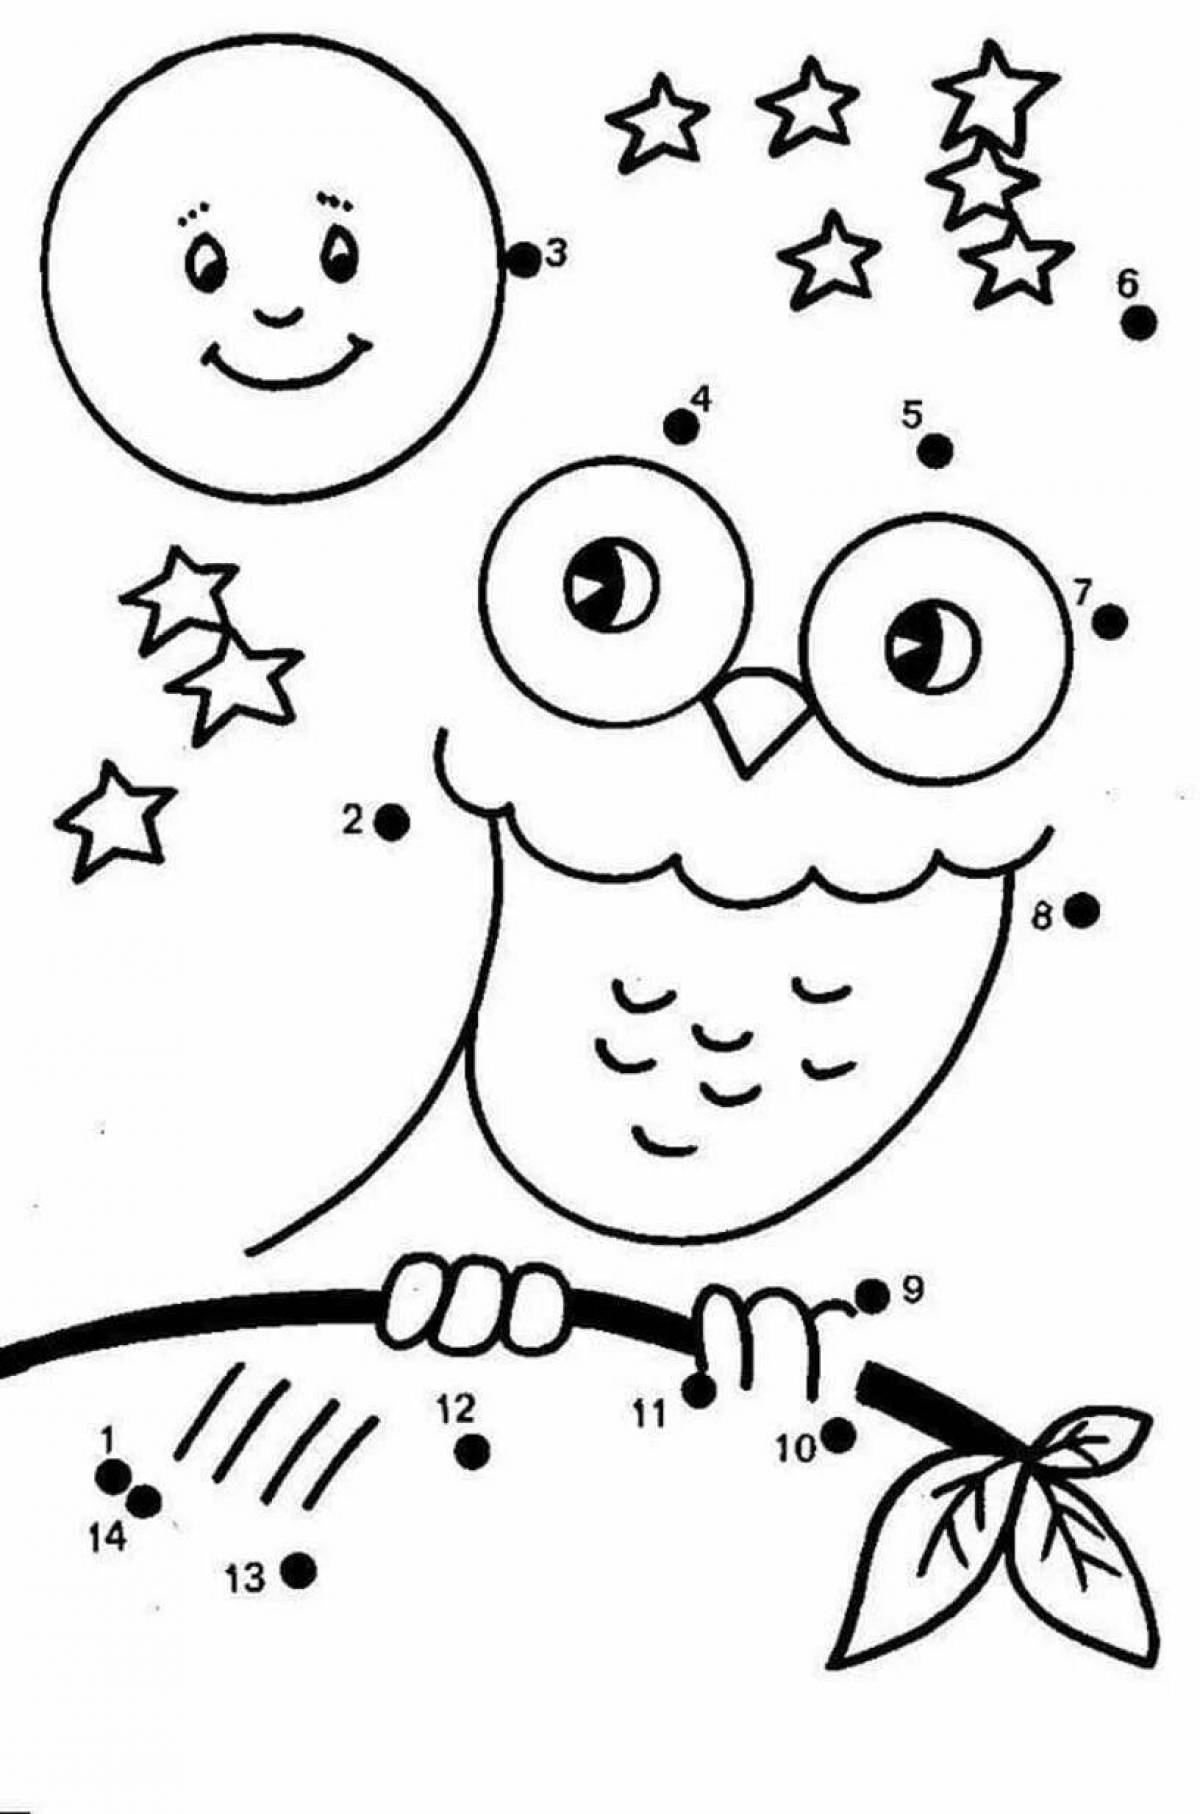 Intriguing connect the dots coloring book for 5 year olds